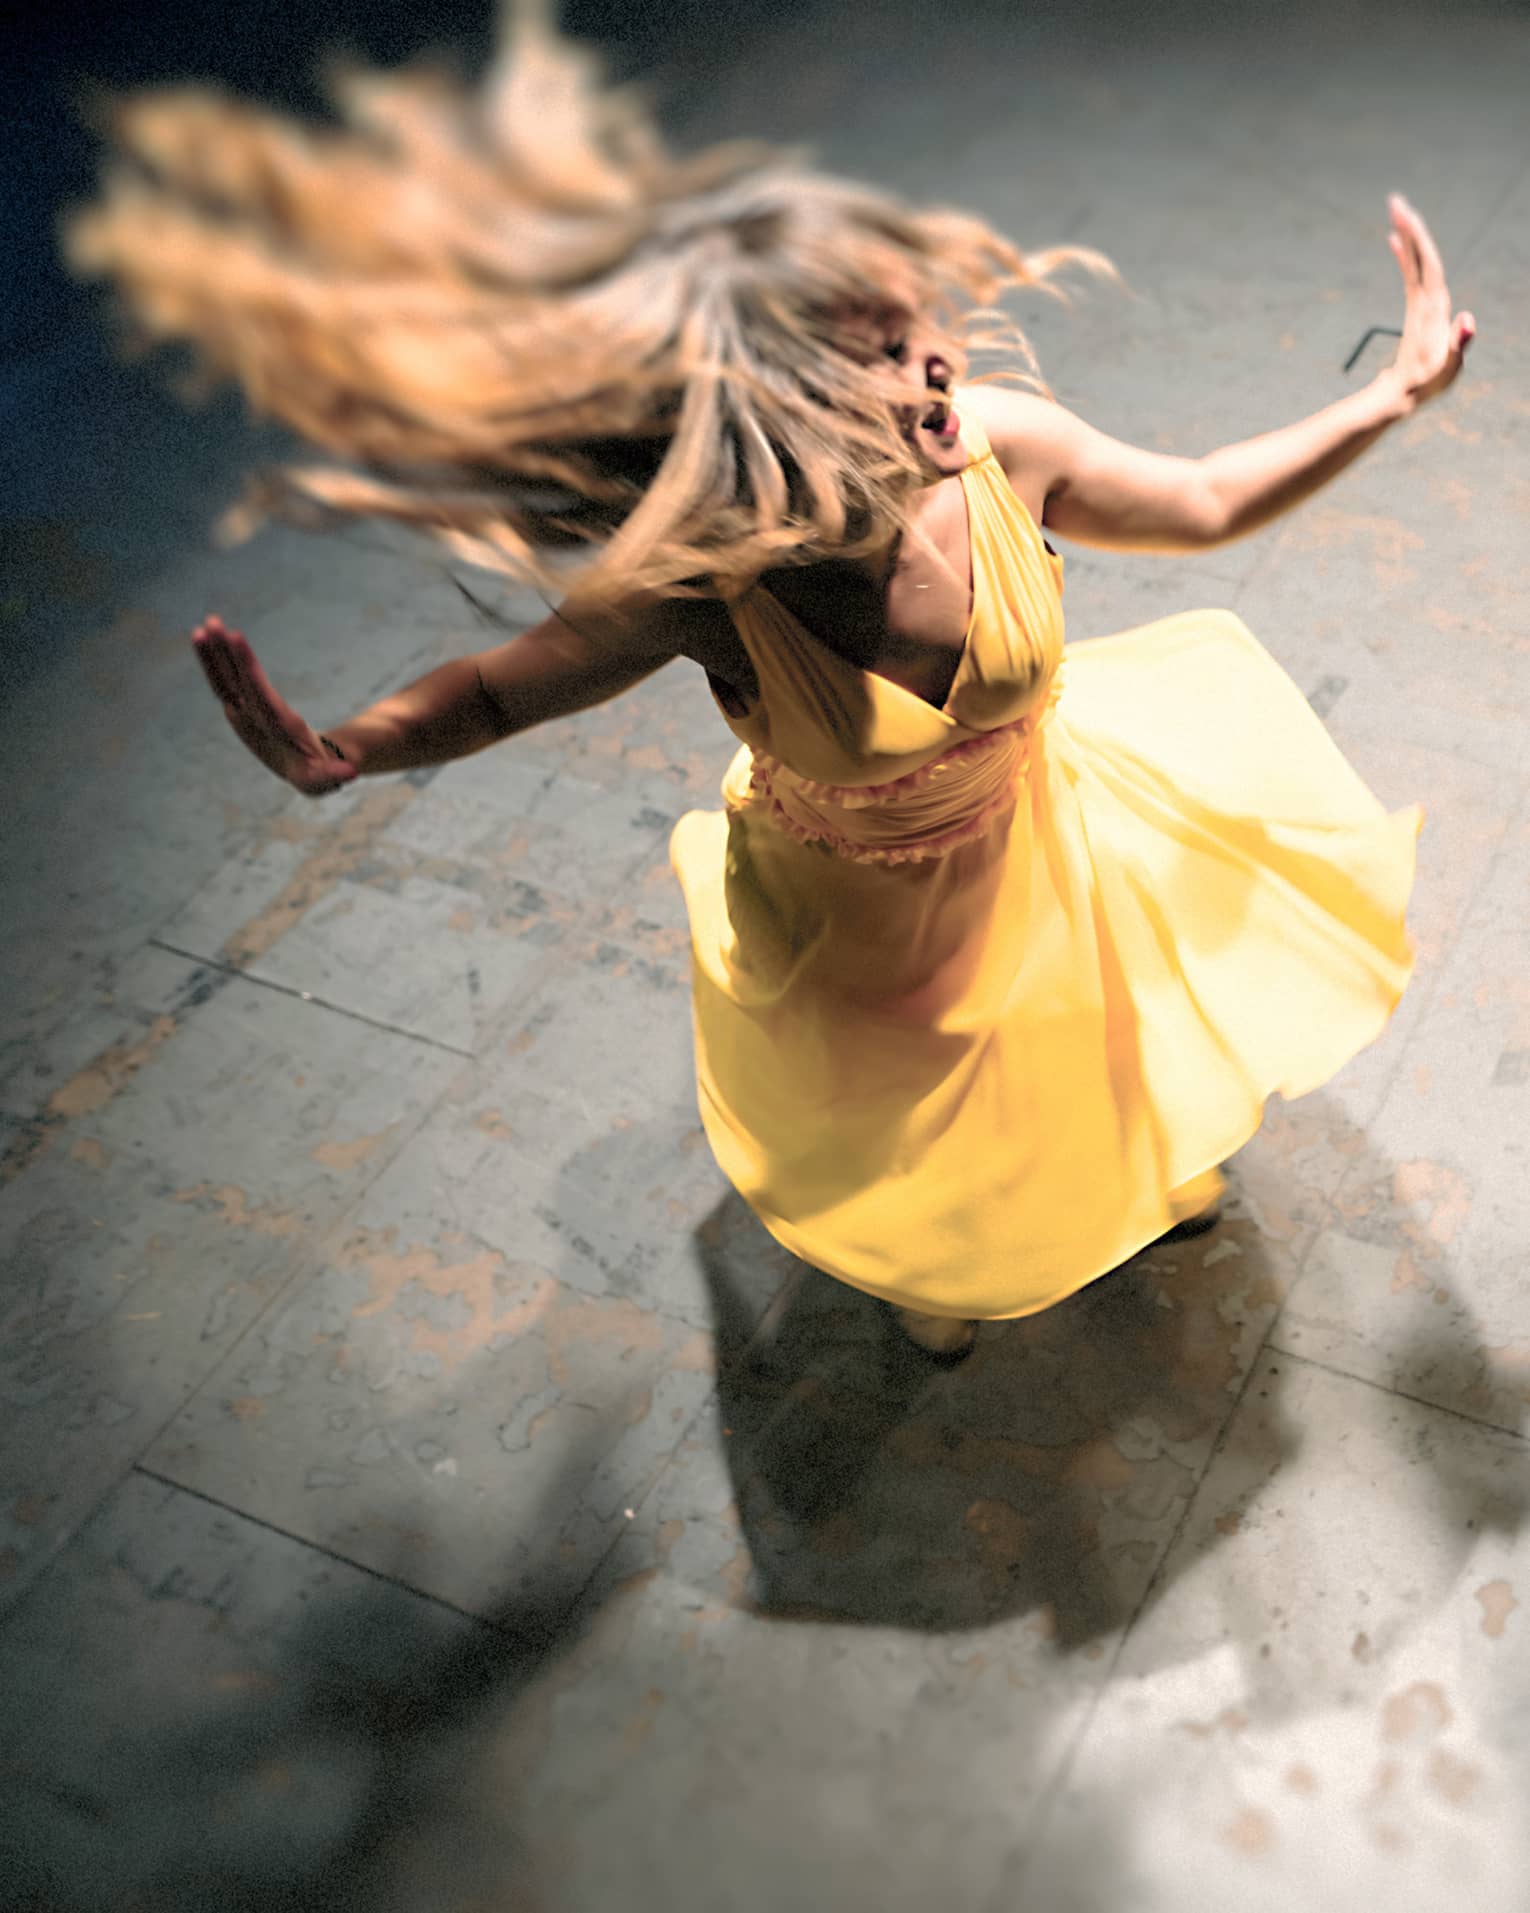 Woman in a yellow dress is spinning on the dance floor as a man wearing all black dances next to her